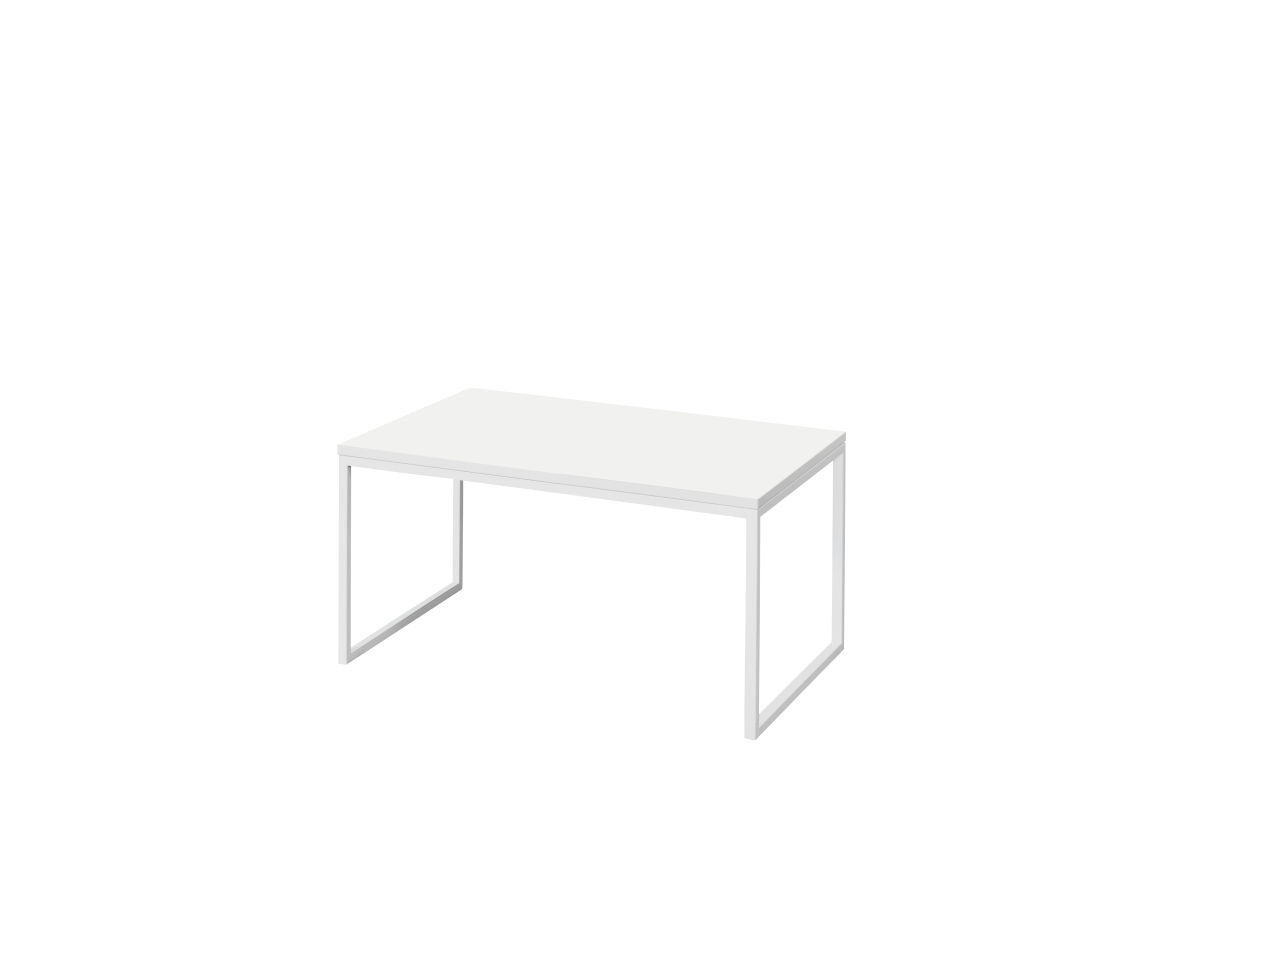 now! by hülsta. coffee tables | Couchtisch CT 17-1 | H: 33,8 cm | B: 70,6 cm | T: 41,7 cm